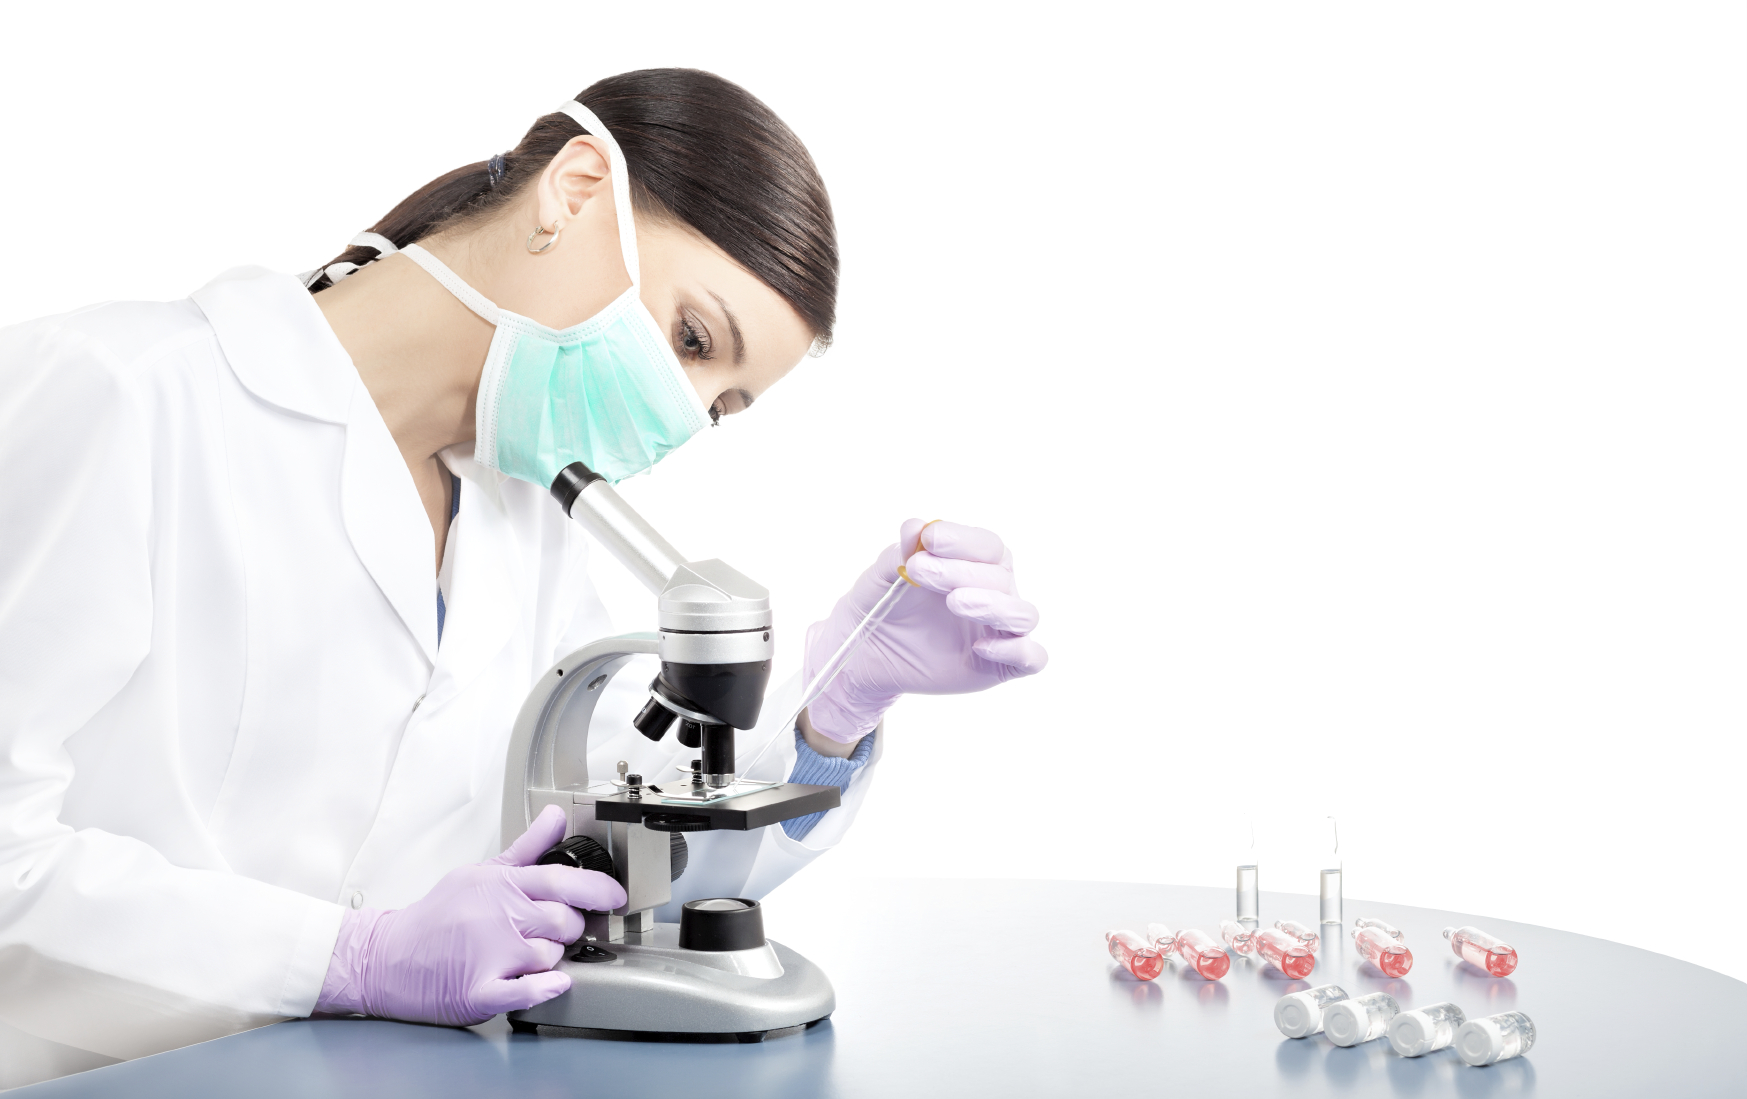 What Is An Embryologist’s Role?